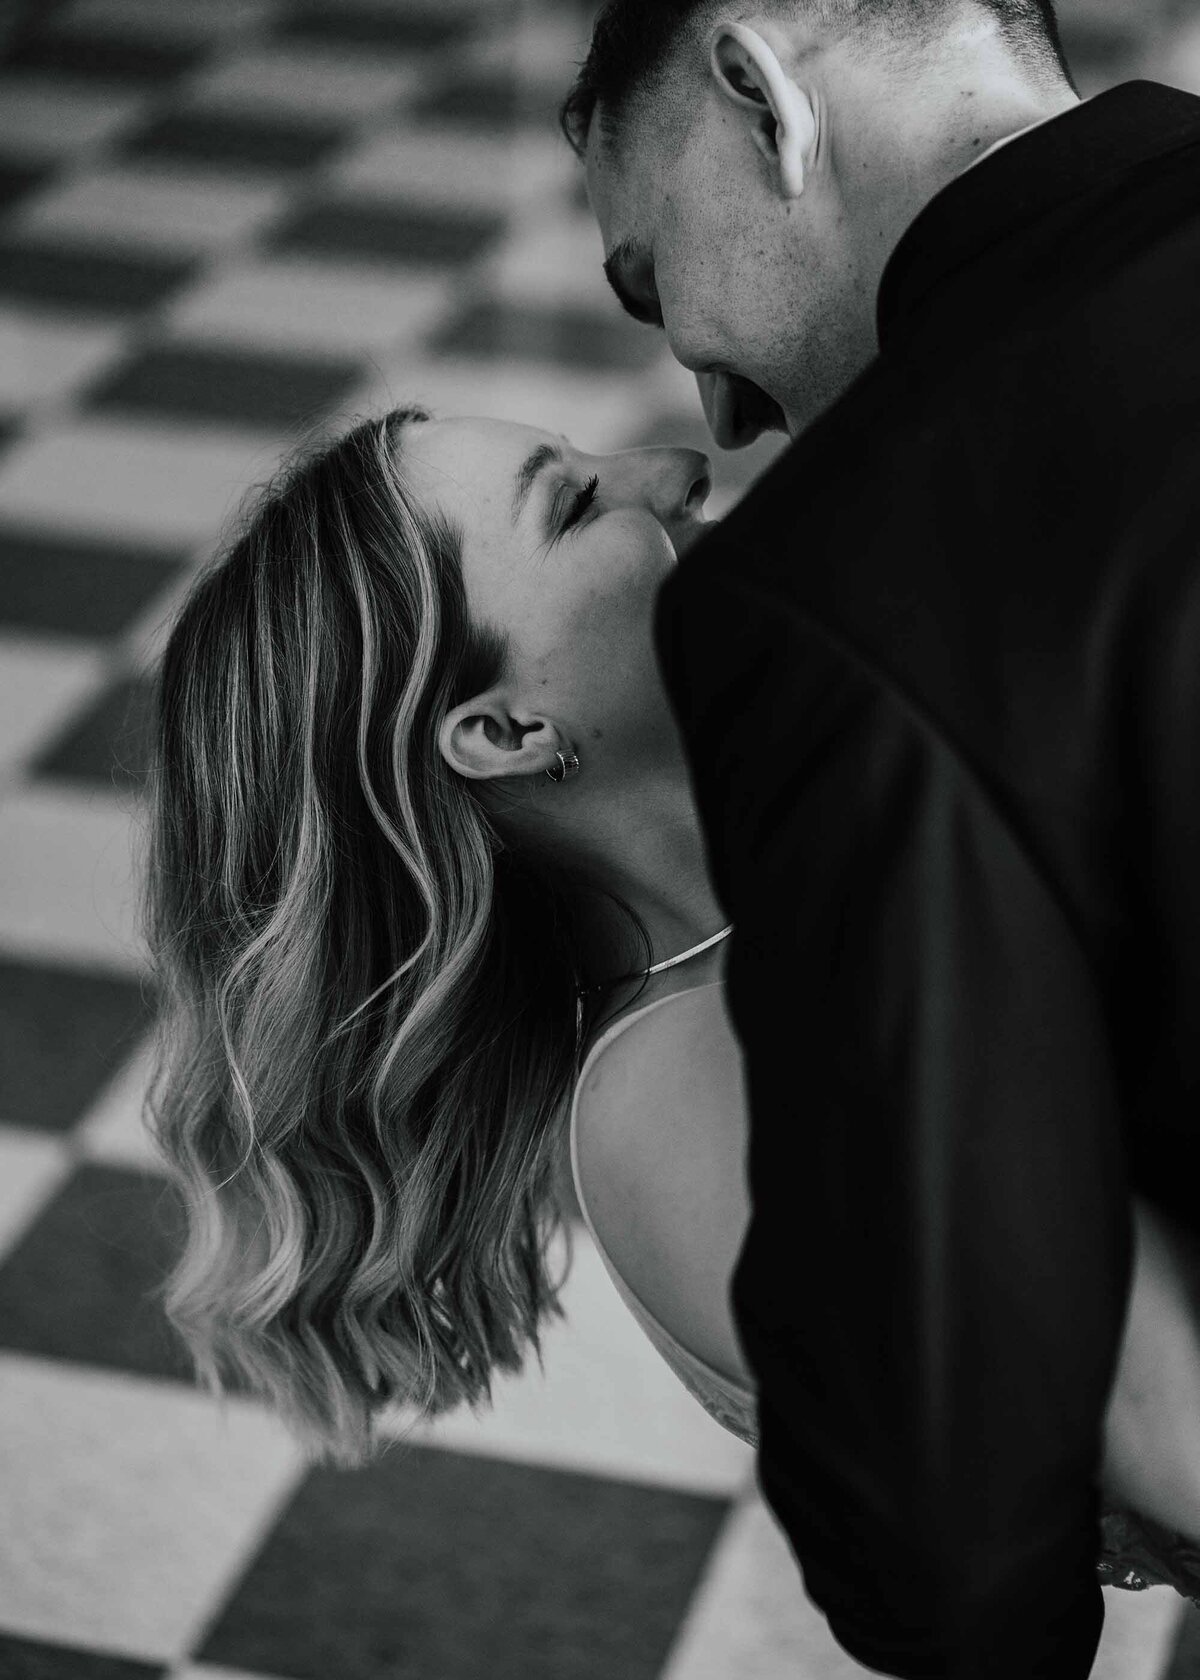 Maddie Rae Photography black and white up close images of bride and groom dip kissing . taken from behind the groom